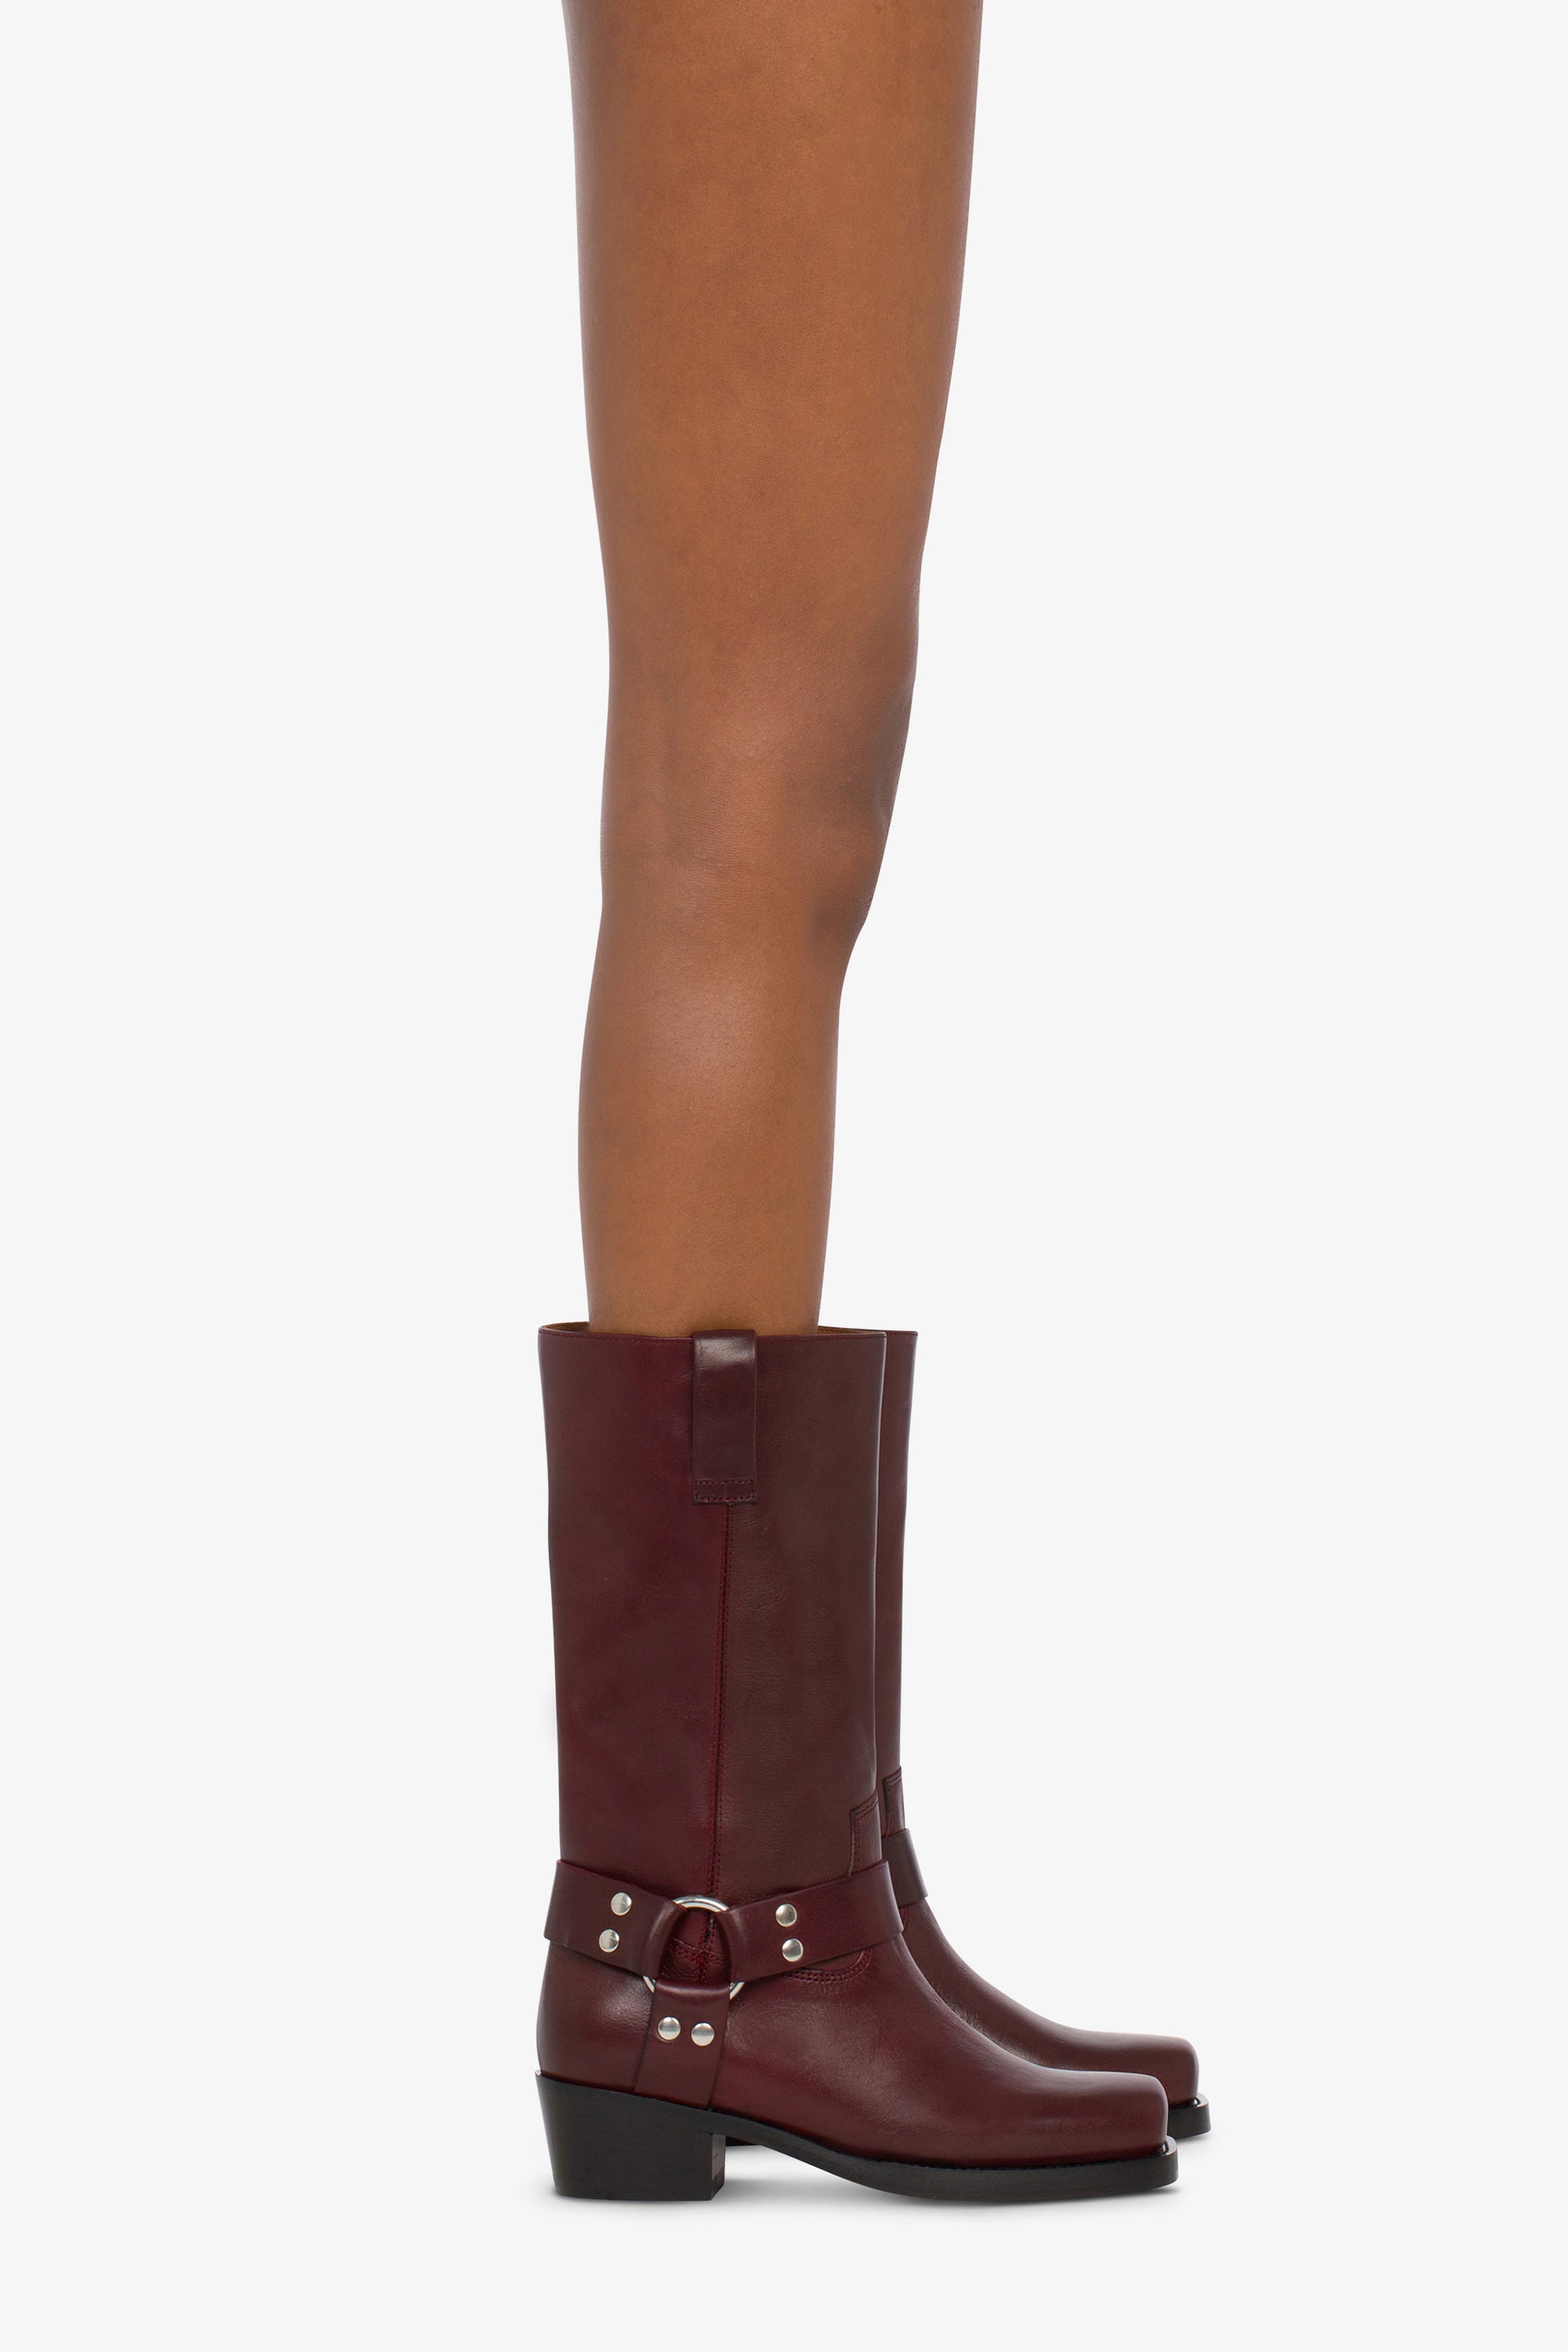 Square-toe boots in smooth plum leather - Produkt getragen